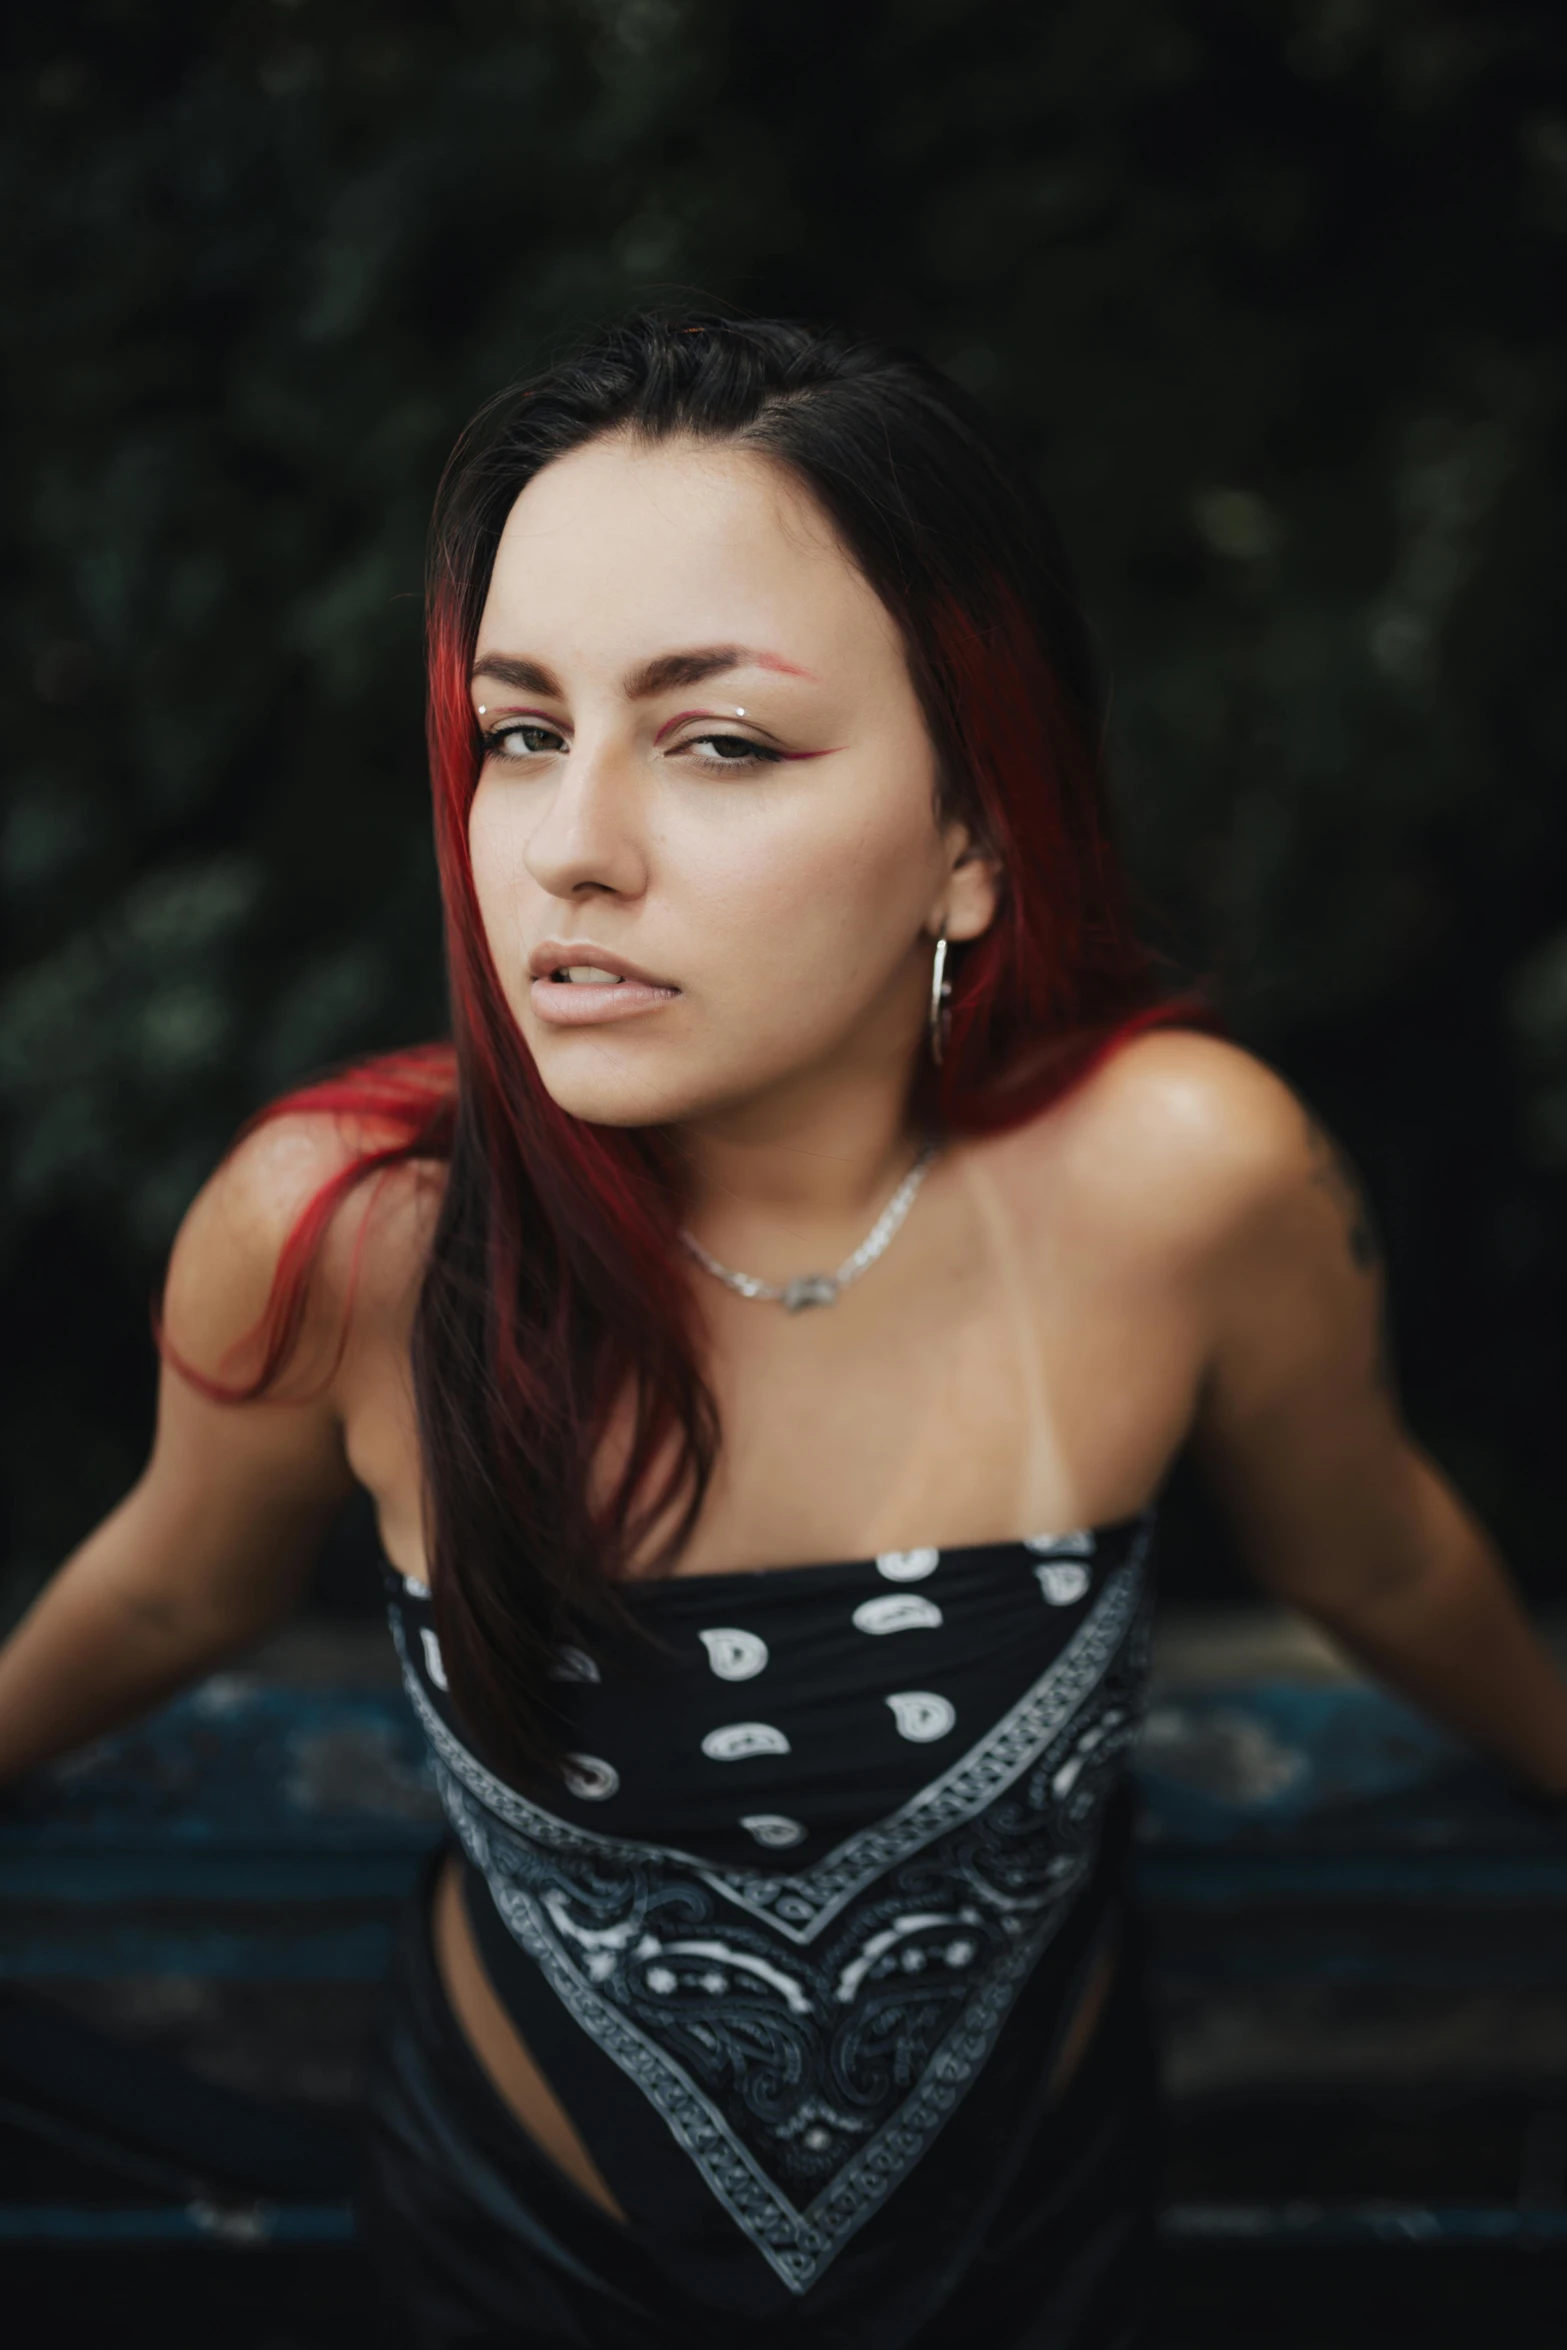 a woman with red hair is posing for the camera